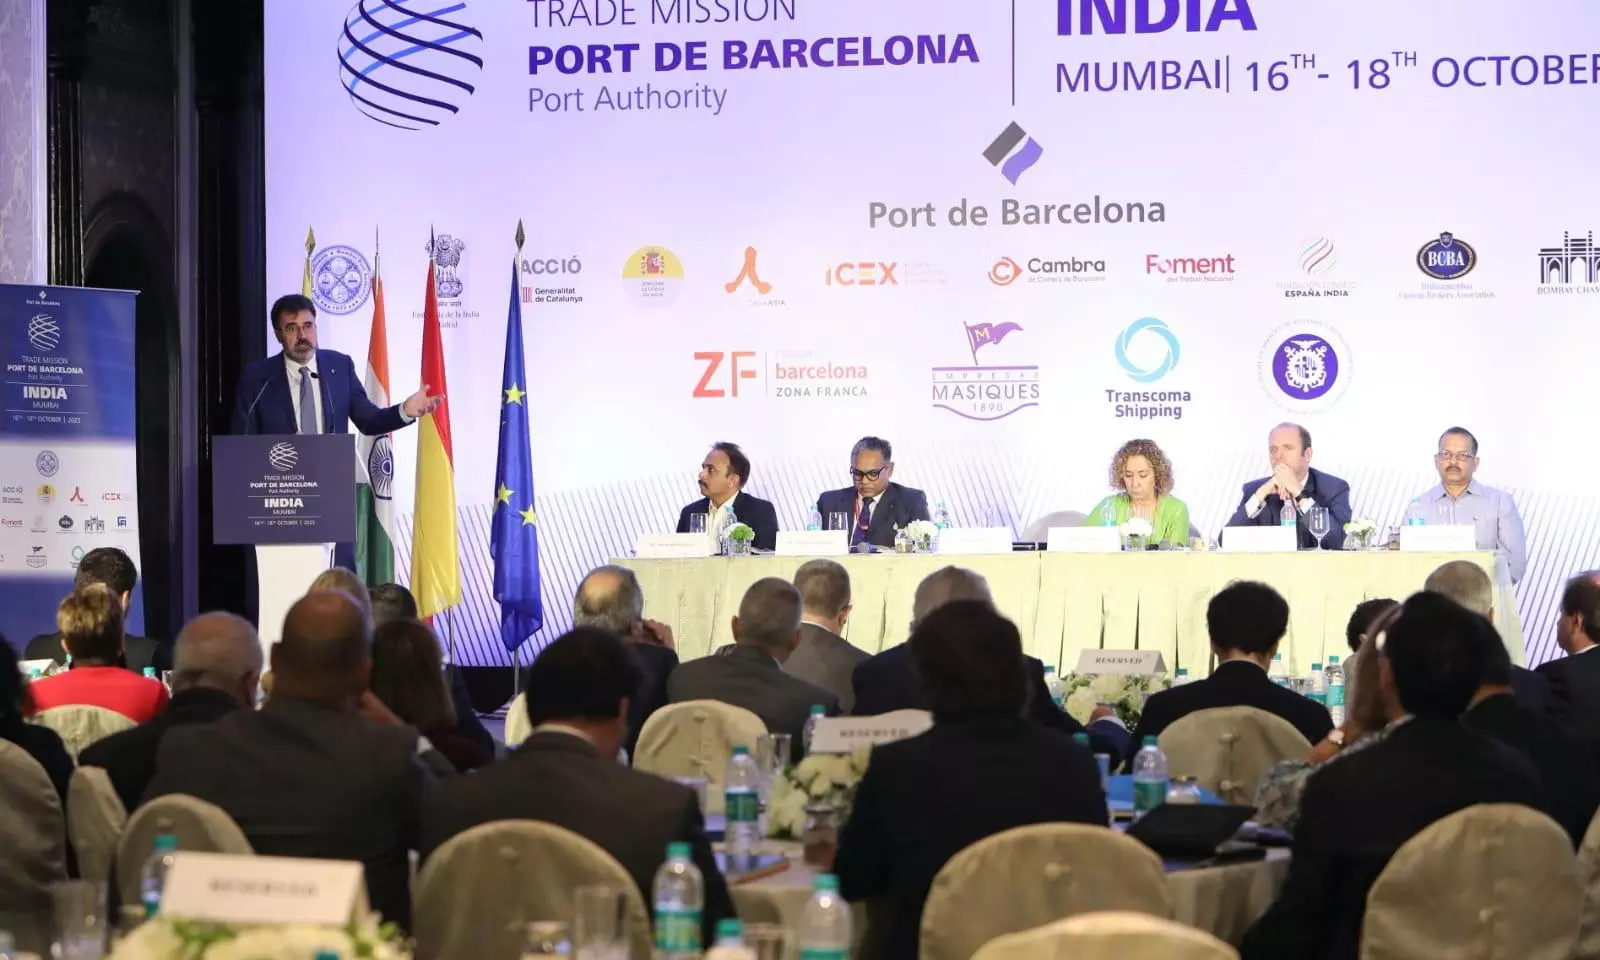 Port of Barcelona strategic ally for trade with Europe